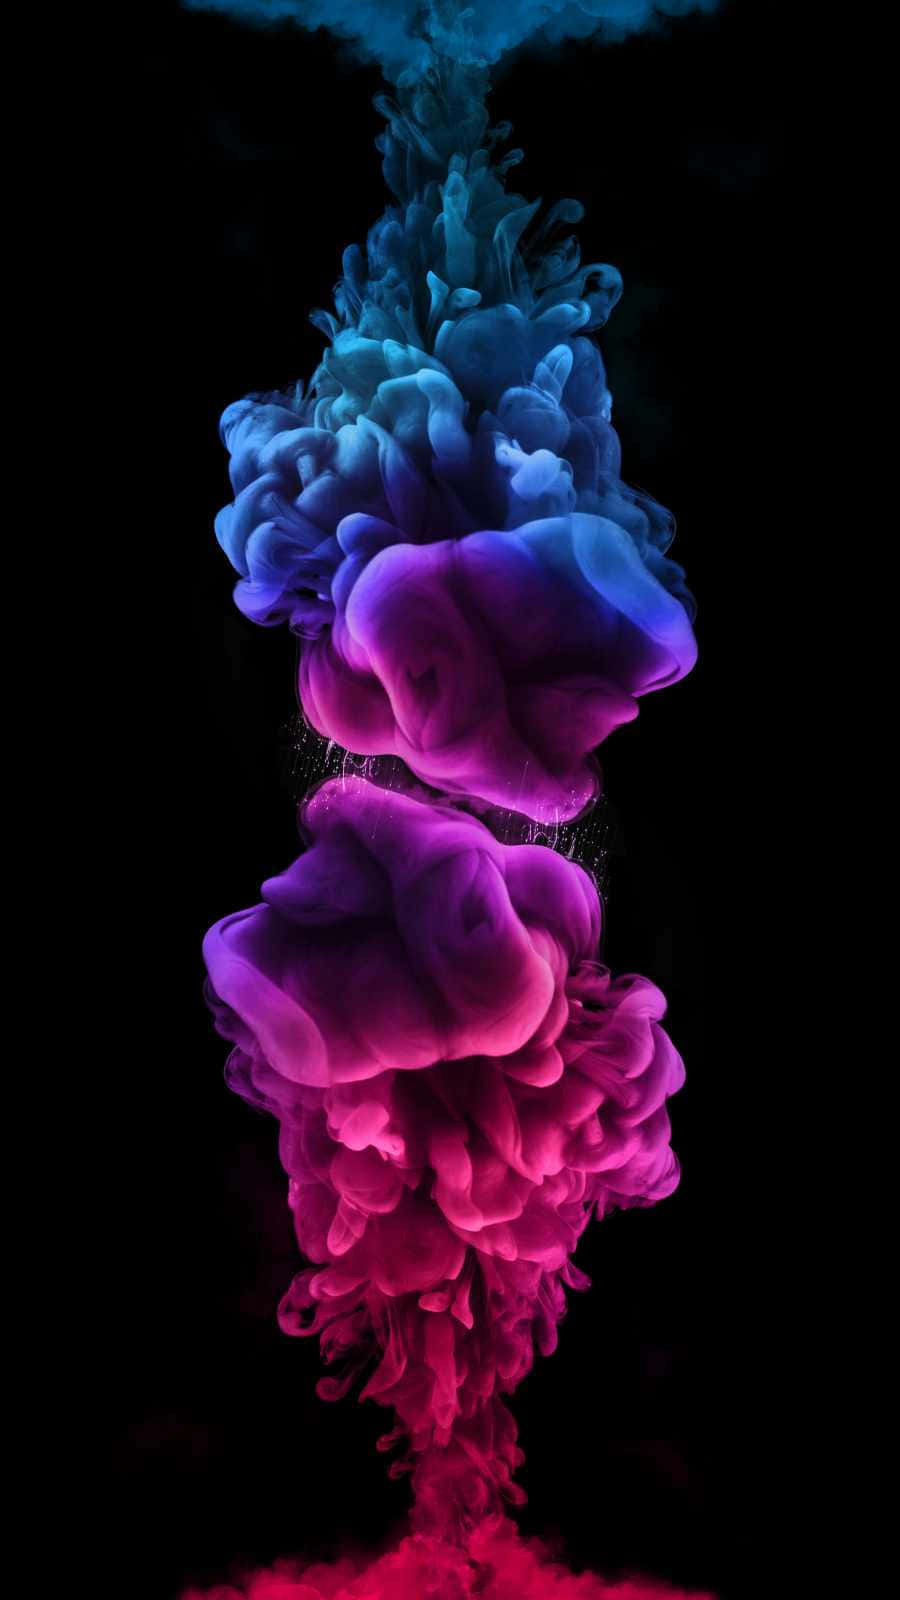 Colorful Smoke Pictures | Download Free Images on Unsplash